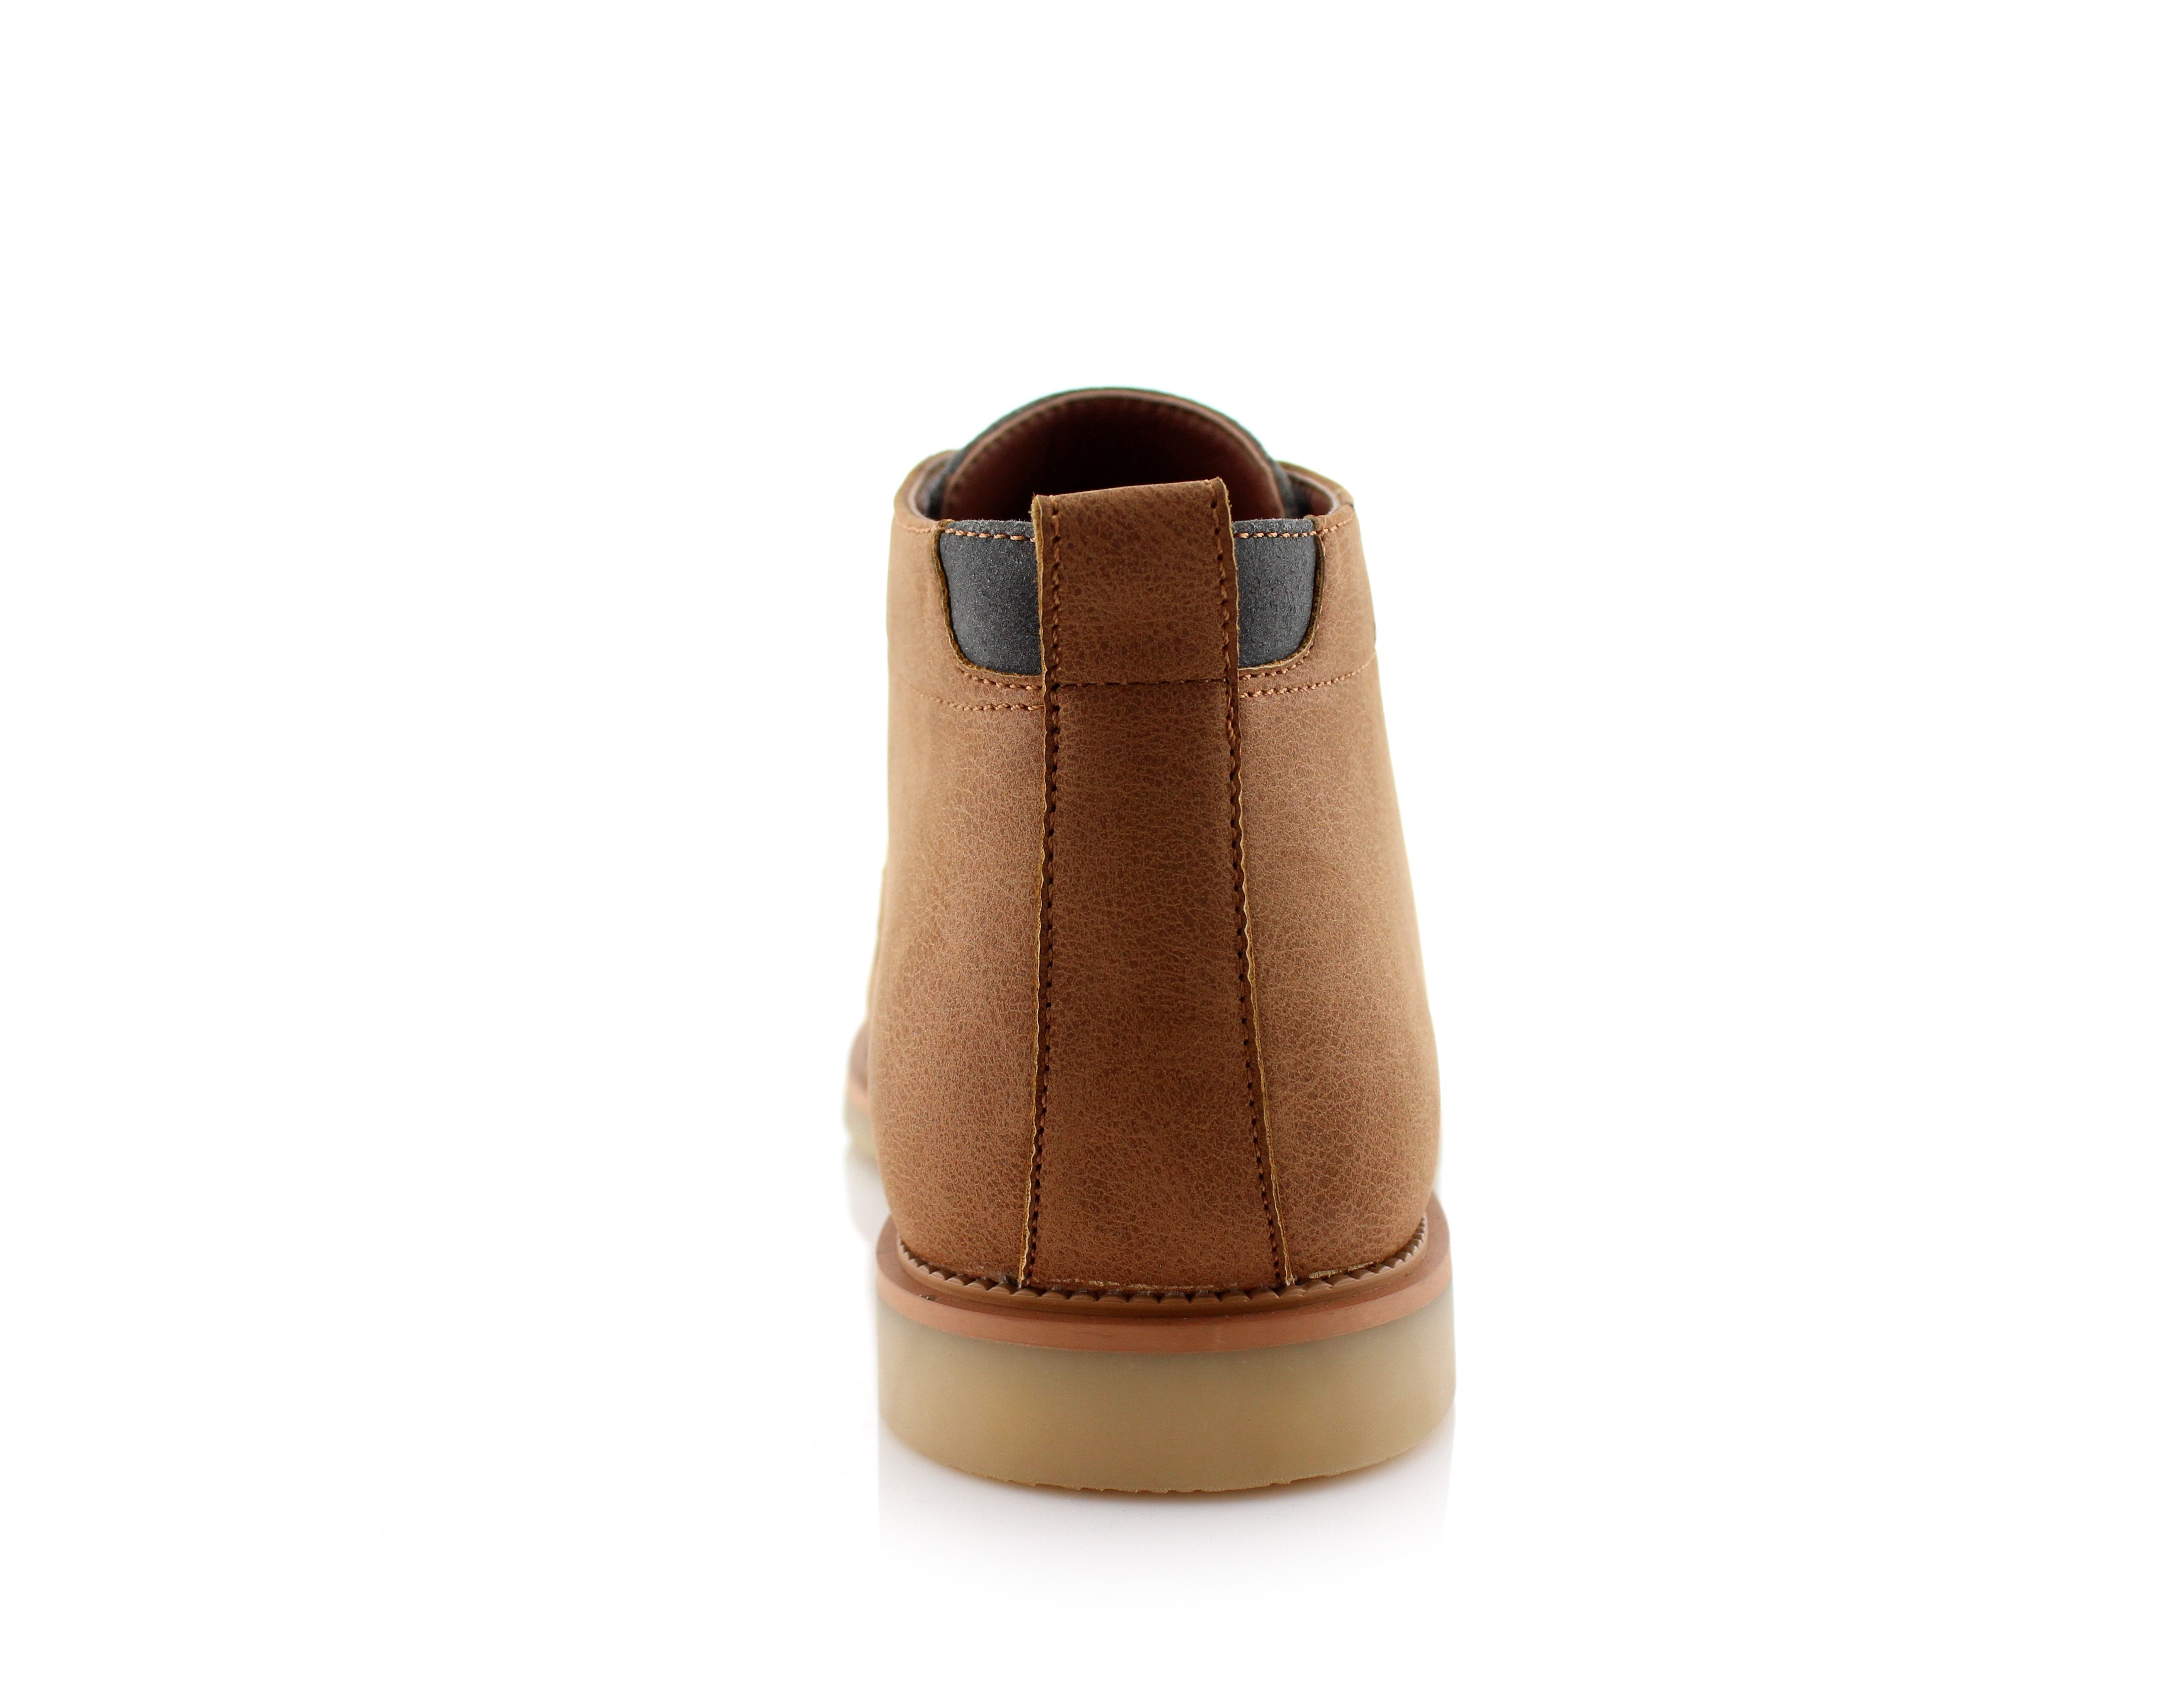 Two-Toned Chukka Boots | Marvin by Ferro Aldo | Conal Footwear | Back Angle View